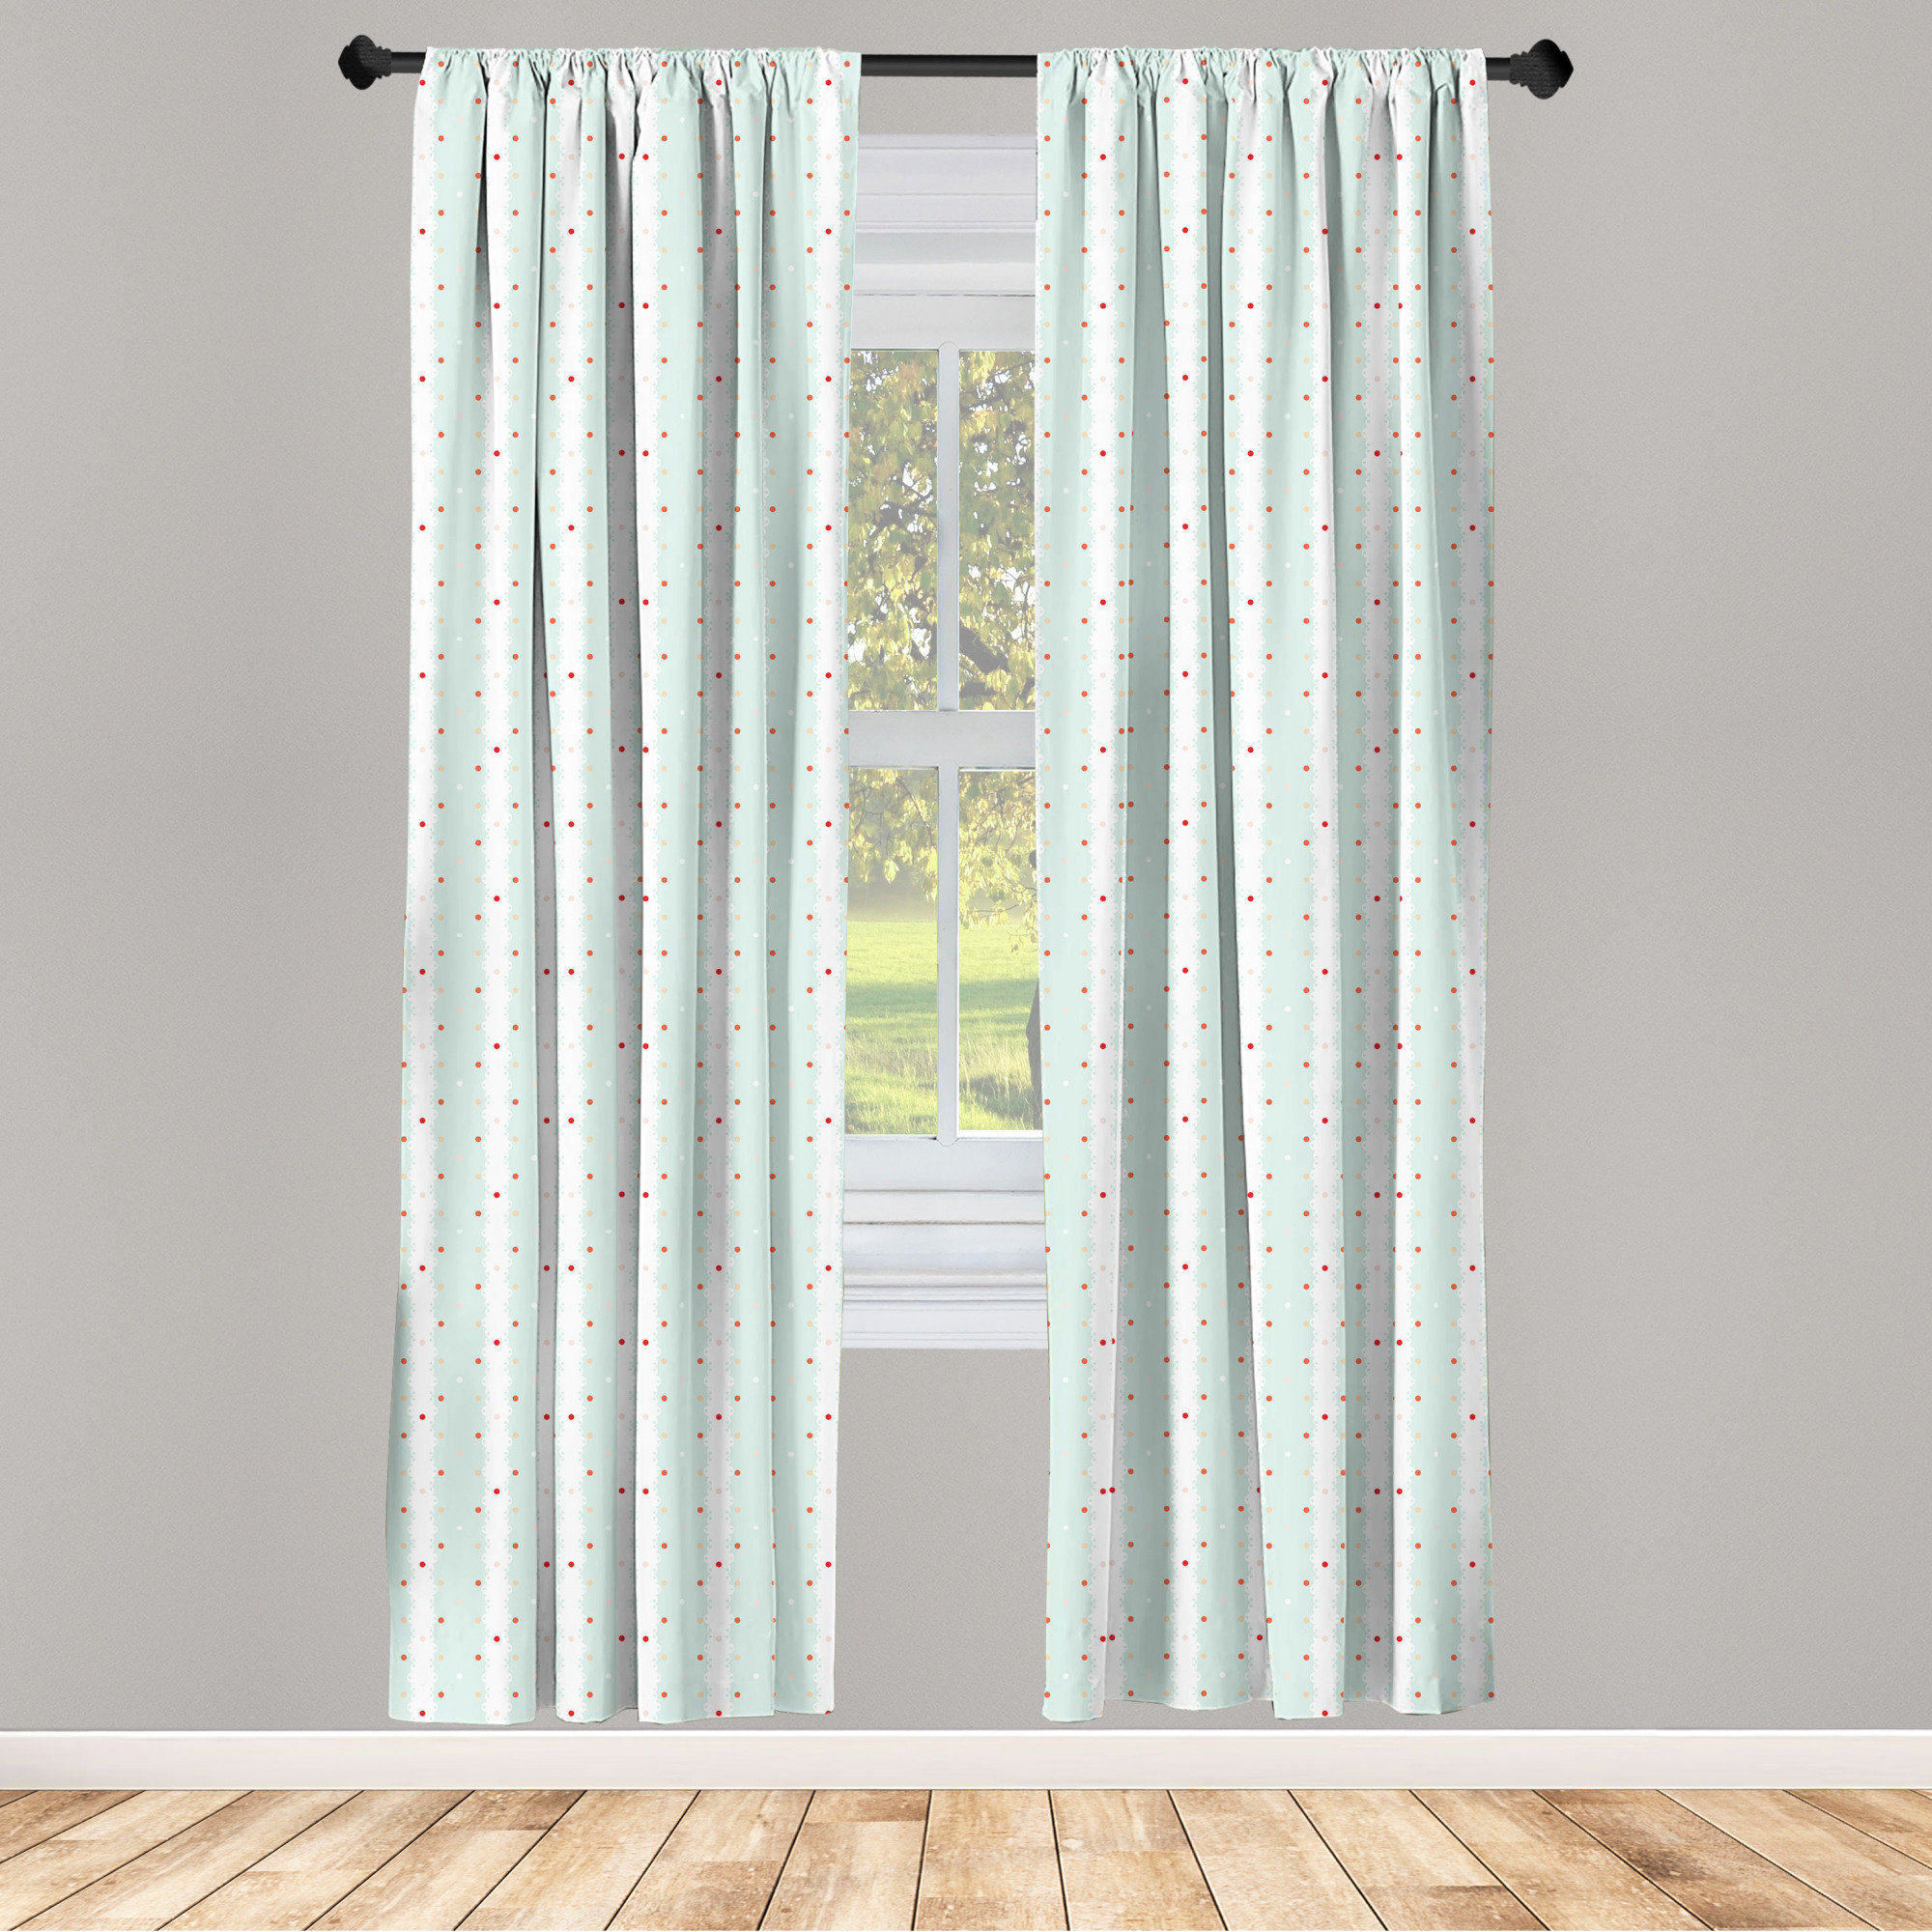 Abstract Form Microfiber Curtains 2 Panel Set Living Room Bedroom in 3 Sizes 